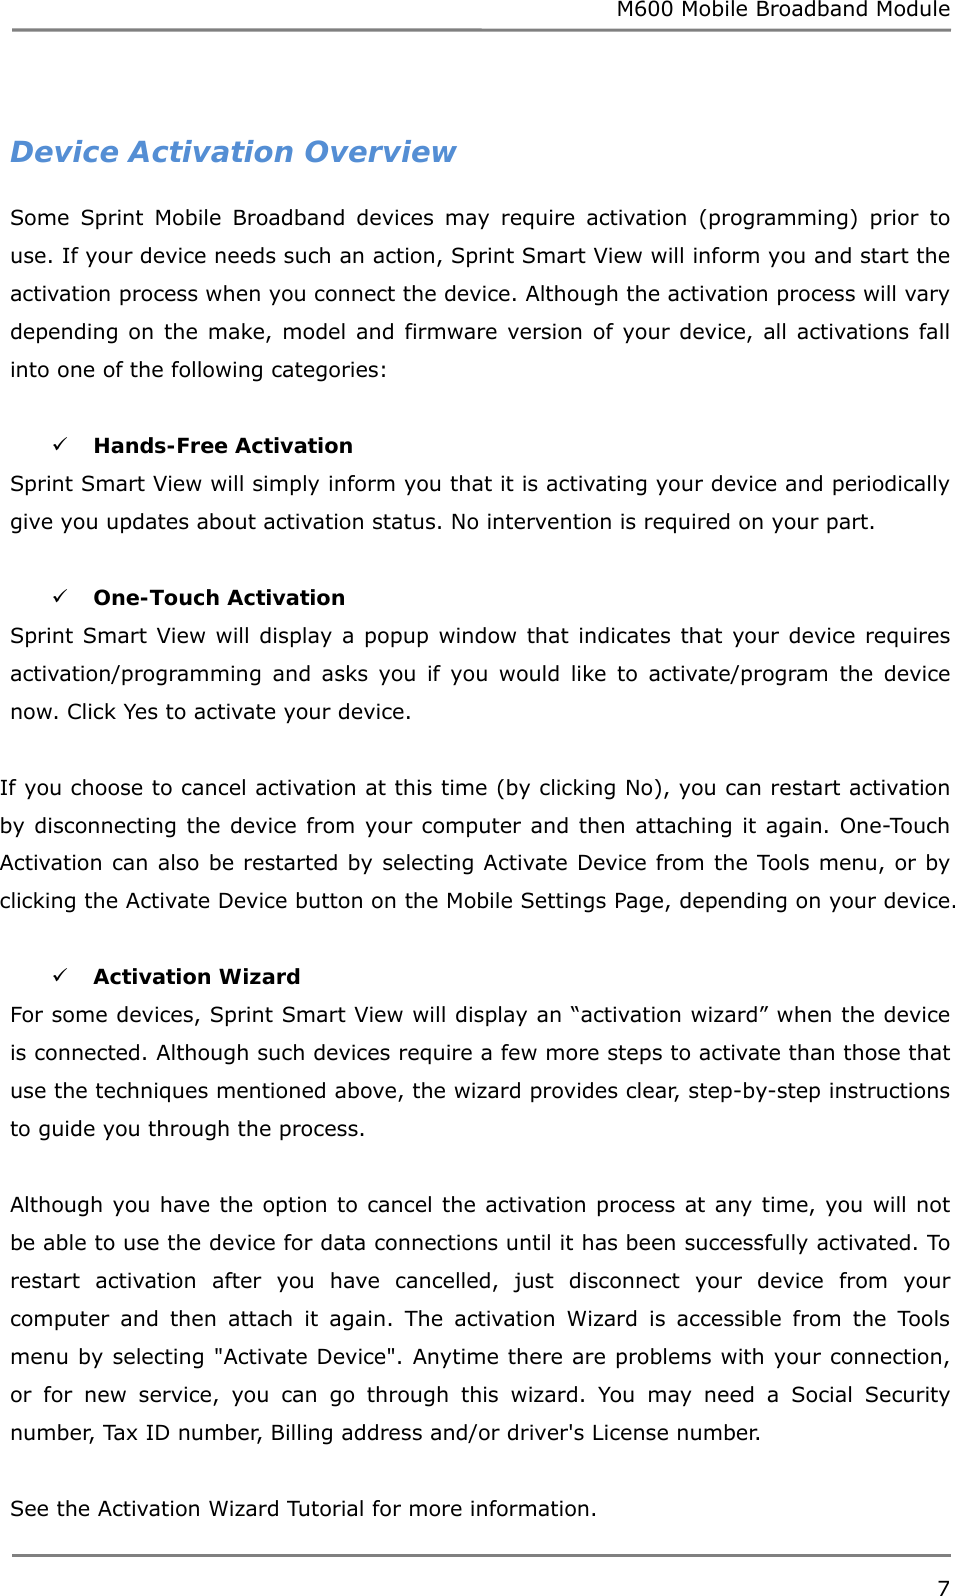 M600 Mobile Broadband Module 7   Device Activation Overview Some Sprint Mobile Broadband devices may require activation (programming) prior to use. If your device needs such an action, Sprint Smart View will inform you and start the activation process when you connect the device. Although the activation process will vary depending on the make, model and firmware version of your device, all activations fall into one of the following categories:   Hands-Free Activation  Sprint Smart View will simply inform you that it is activating your device and periodically give you updates about activation status. No intervention is required on your part.   One-Touch Activation  Sprint Smart View will display a popup window that indicates that your device requires activation/programming and asks you if you would like to activate/program the device now. Click Yes to activate your device.  If you choose to cancel activation at this time (by clicking No), you can restart activation by disconnecting the device from your computer and then attaching it again. One-Touch Activation can also be restarted by selecting Activate Device from the Tools menu, or by clicking the Activate Device button on the Mobile Settings Page, depending on your device.   Activation Wizard For some devices, Sprint Smart View will display an “activation wizard” when the device is connected. Although such devices require a few more steps to activate than those that use the techniques mentioned above, the wizard provides clear, step-by-step instructions to guide you through the process.  Although you have the option to cancel the activation process at any time, you will not be able to use the device for data connections until it has been successfully activated. To restart activation after you have cancelled, just disconnect your device from your computer and then attach it again. The activation Wizard is accessible from the Tools menu by selecting &quot;Activate Device&quot;. Anytime there are problems with your connection, or for new service, you can go through this wizard. You may need a Social Security number, Tax ID number, Billing address and/or driver&apos;s License number.  See the Activation Wizard Tutorial for more information. 